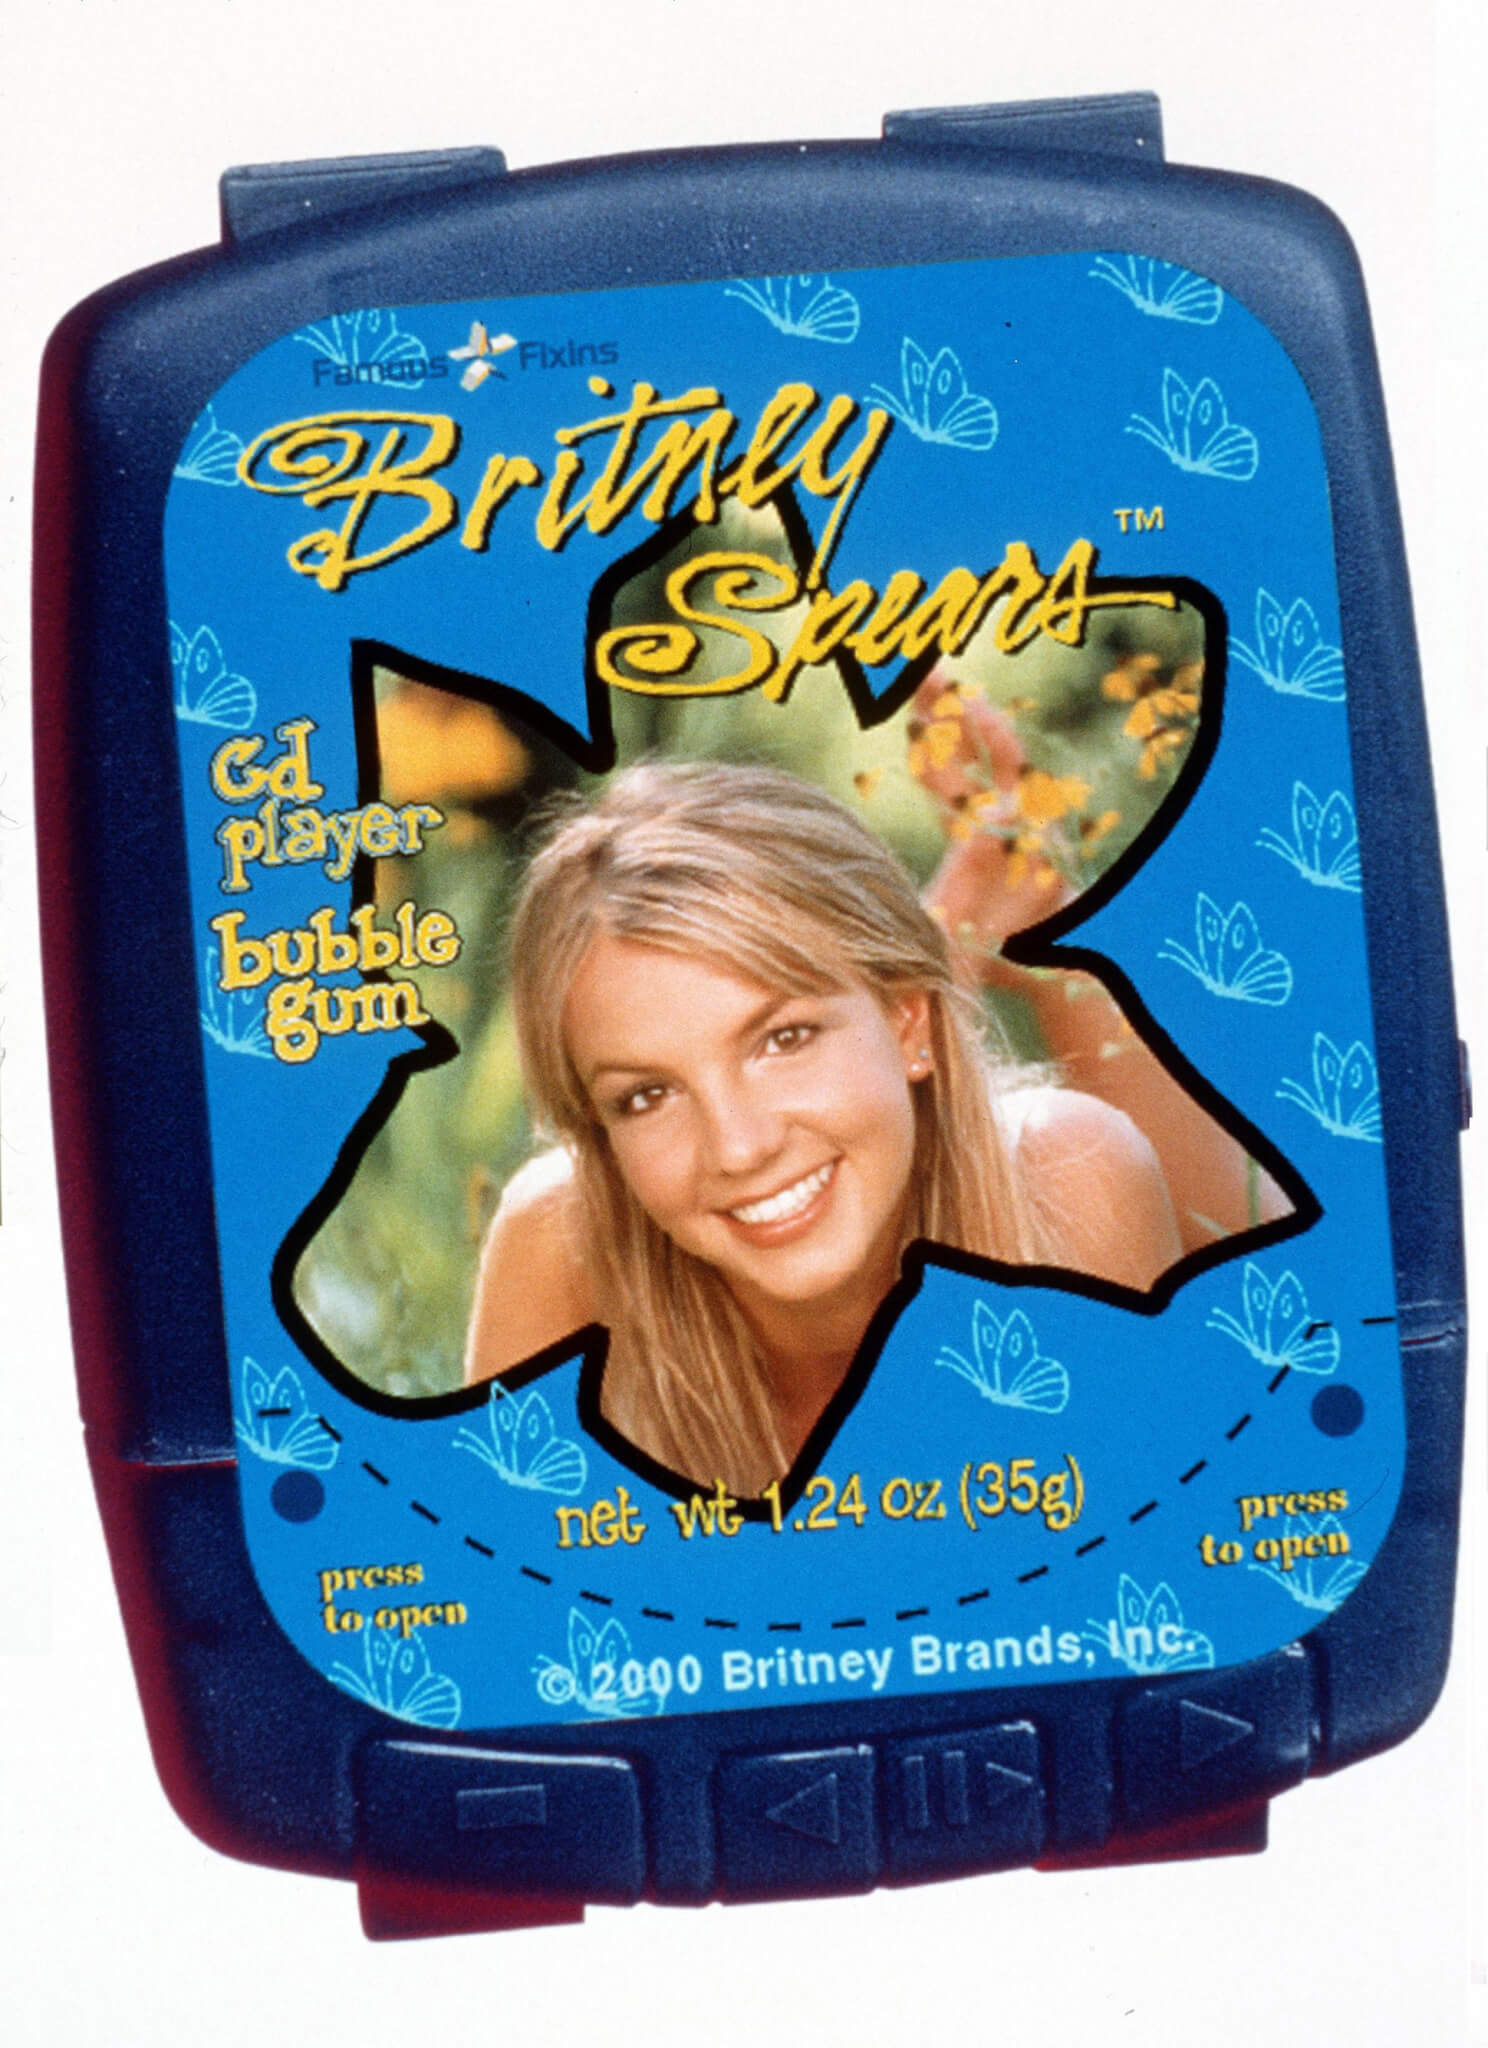 First Photographs Of An Exciting New Line Of Candy/Novelty Products, Such As "Britney Spears Cd Bubble Gum", That Will Be Launched To Coincide With Britney's Concert Tour. (Photo By Getty Images)